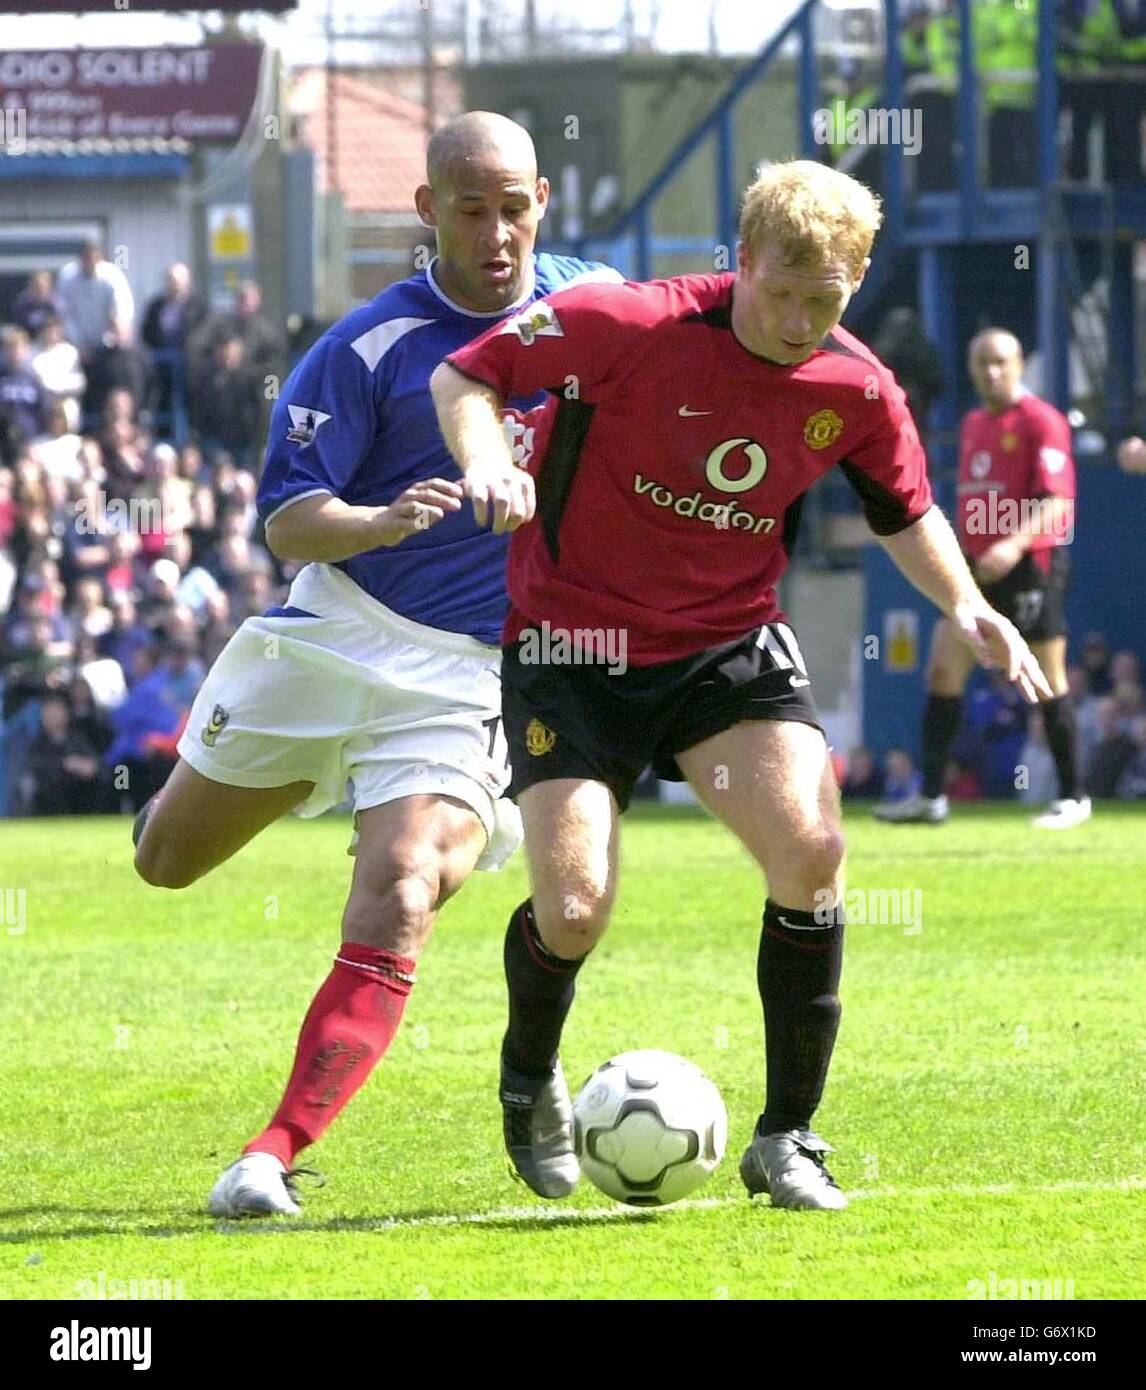 Portsmouth's Nigel Quashie (L) hounds Manchester United's Paul Scholes, during their Barclaycard Premiership match at Fratton Park, Portsmouth. Stock Photo